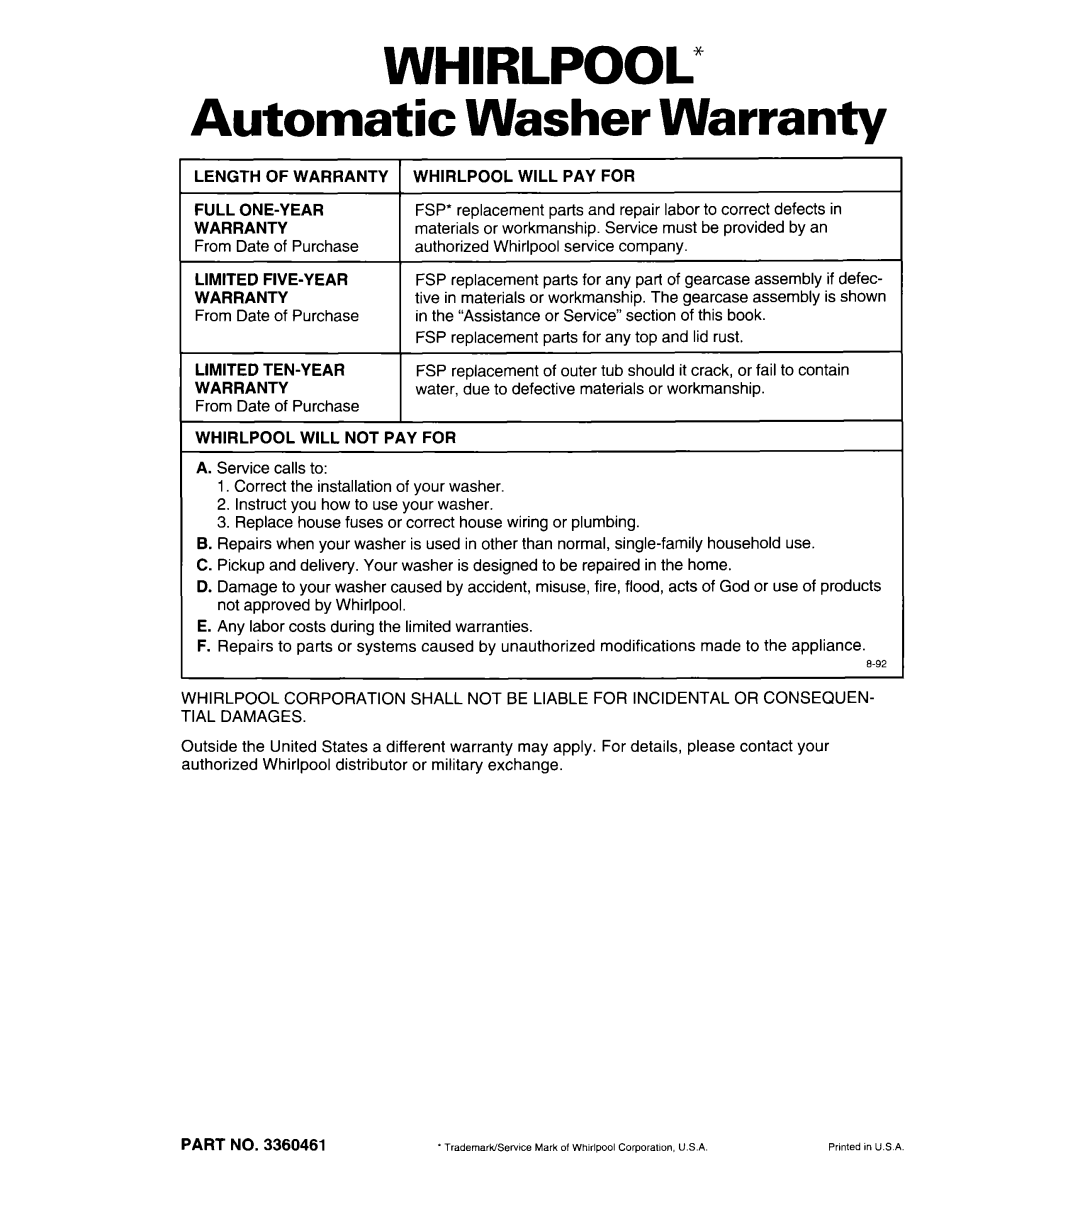 Whirlpool 3360461 warranty WHIRLPOOL” Automatic Washer Warranty, replacement, part, should, water 